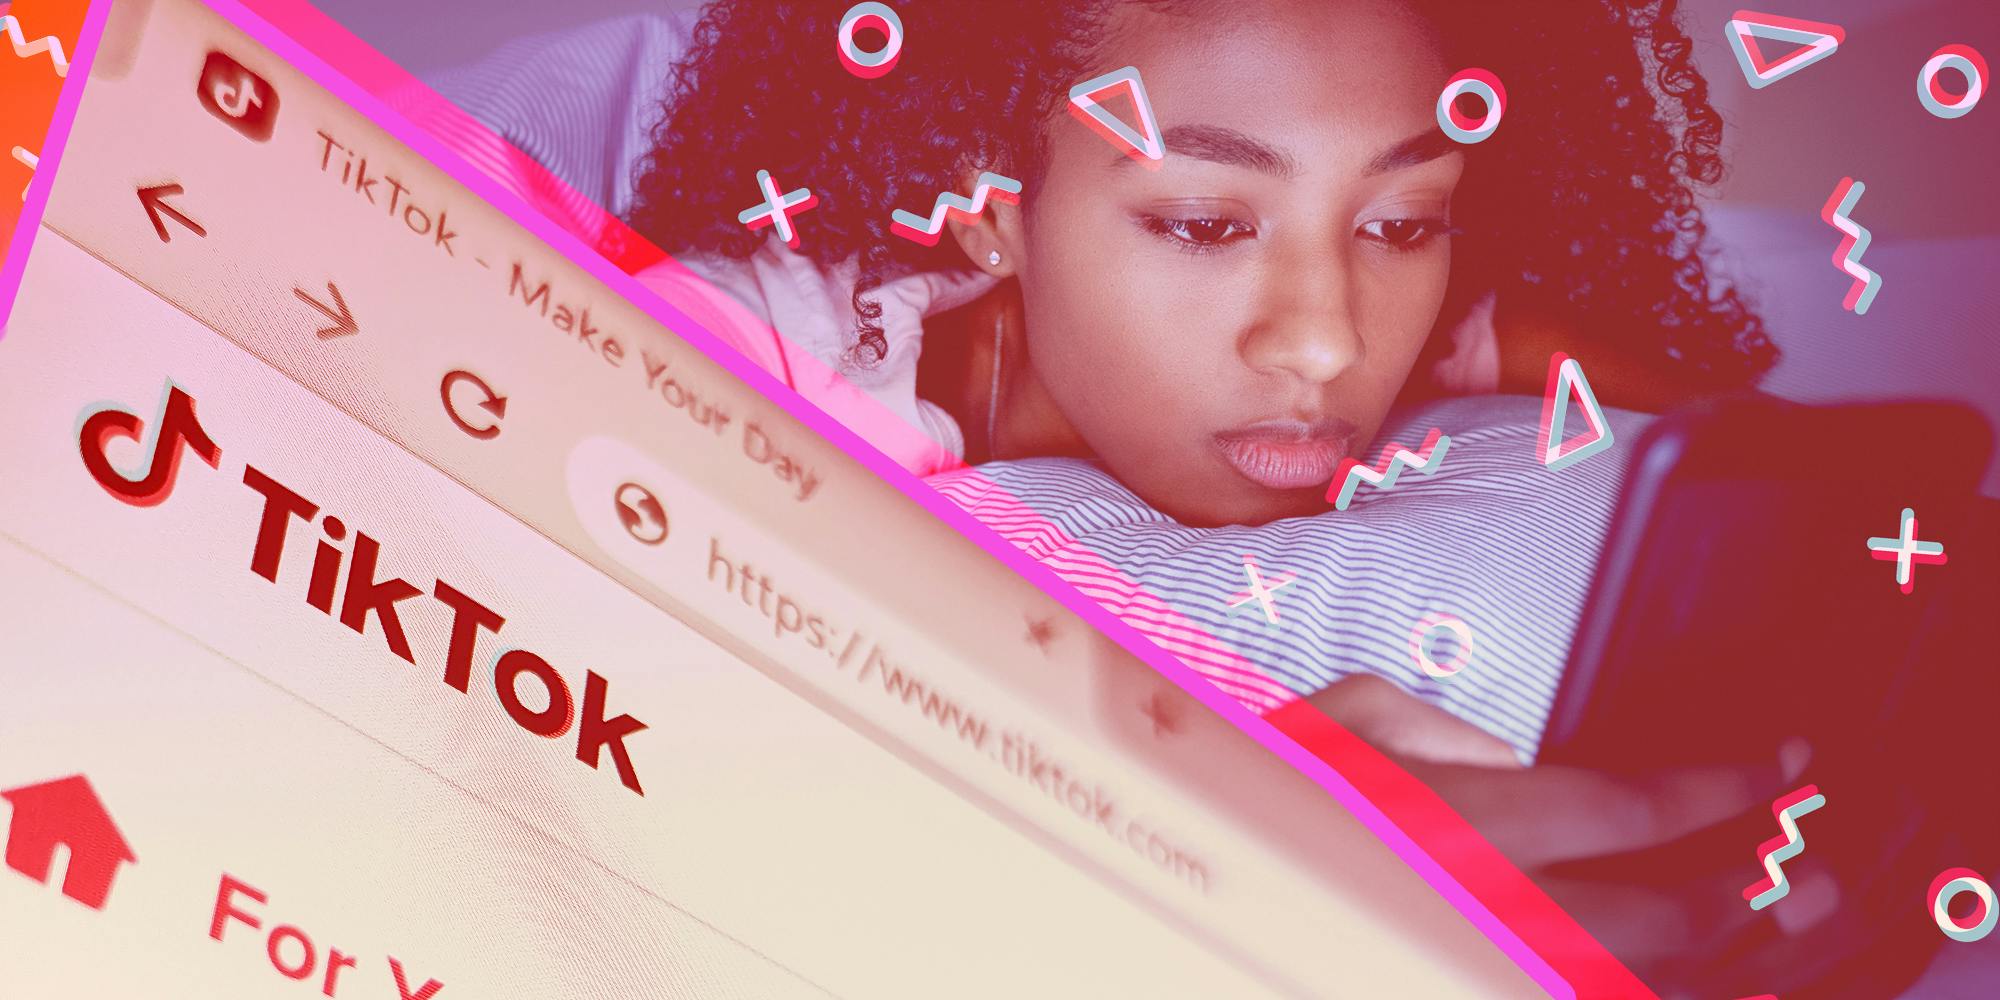 ‘TikTok’s Search Bar is Out to Ruin Lives’: TikTok’s Chaotic Search Recommendations Are Hurting Creators